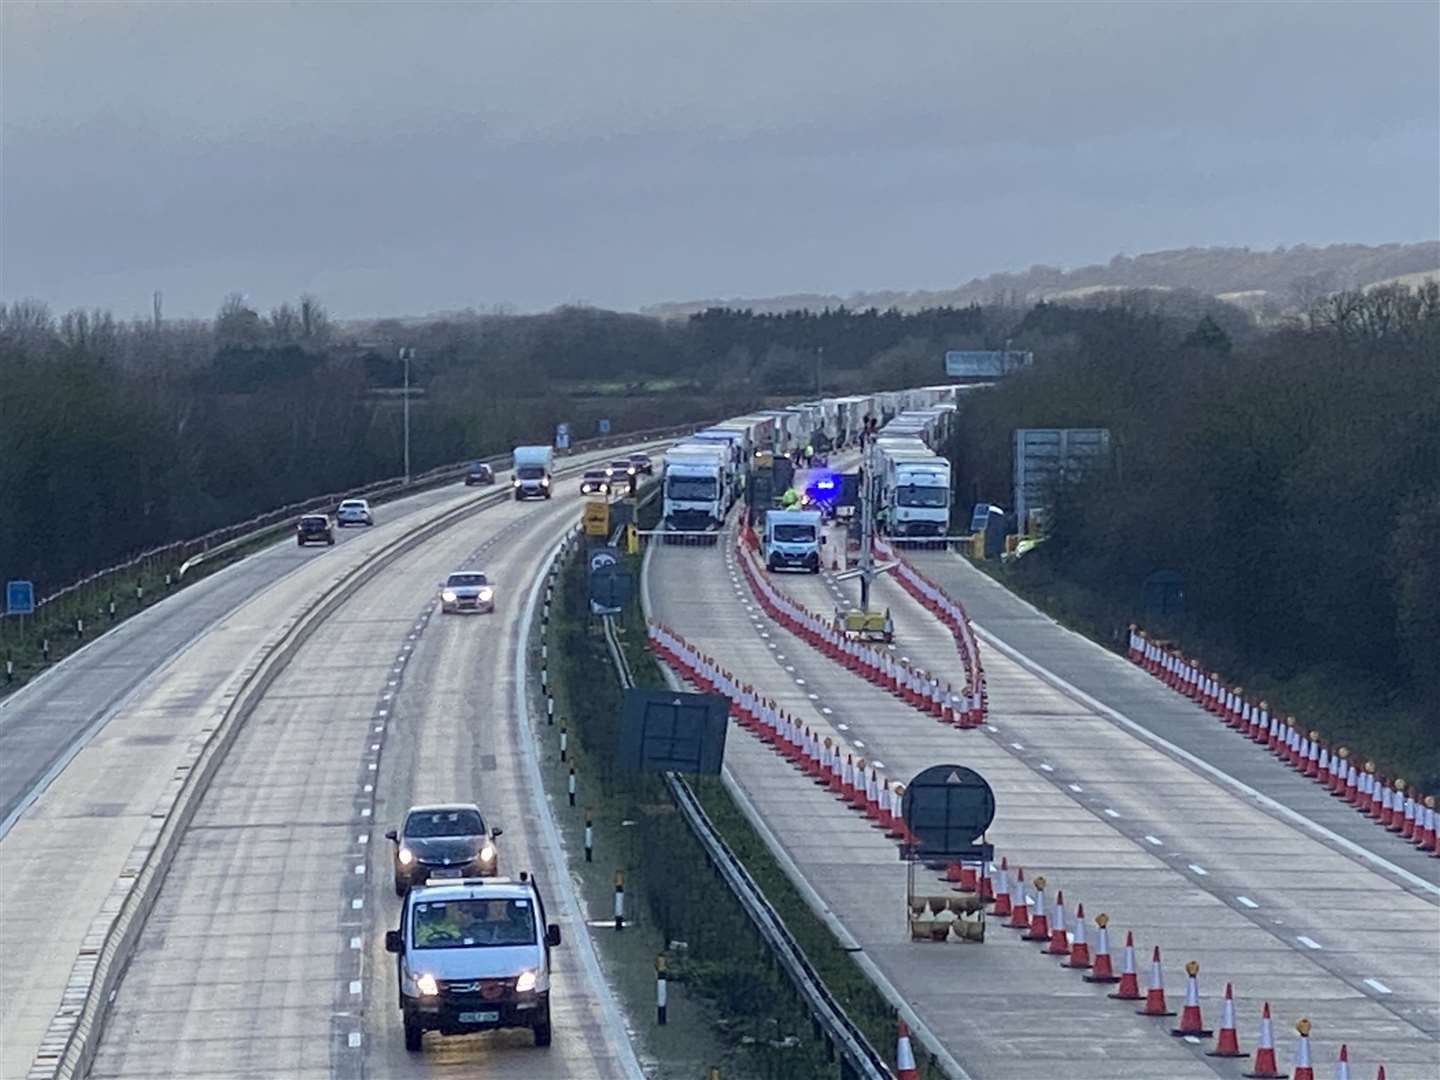 Operation Brock is in place on the M20, with hundreds of trucks being held on the coastbound side between Junctions 8 and 9. Picture: Steve Salter